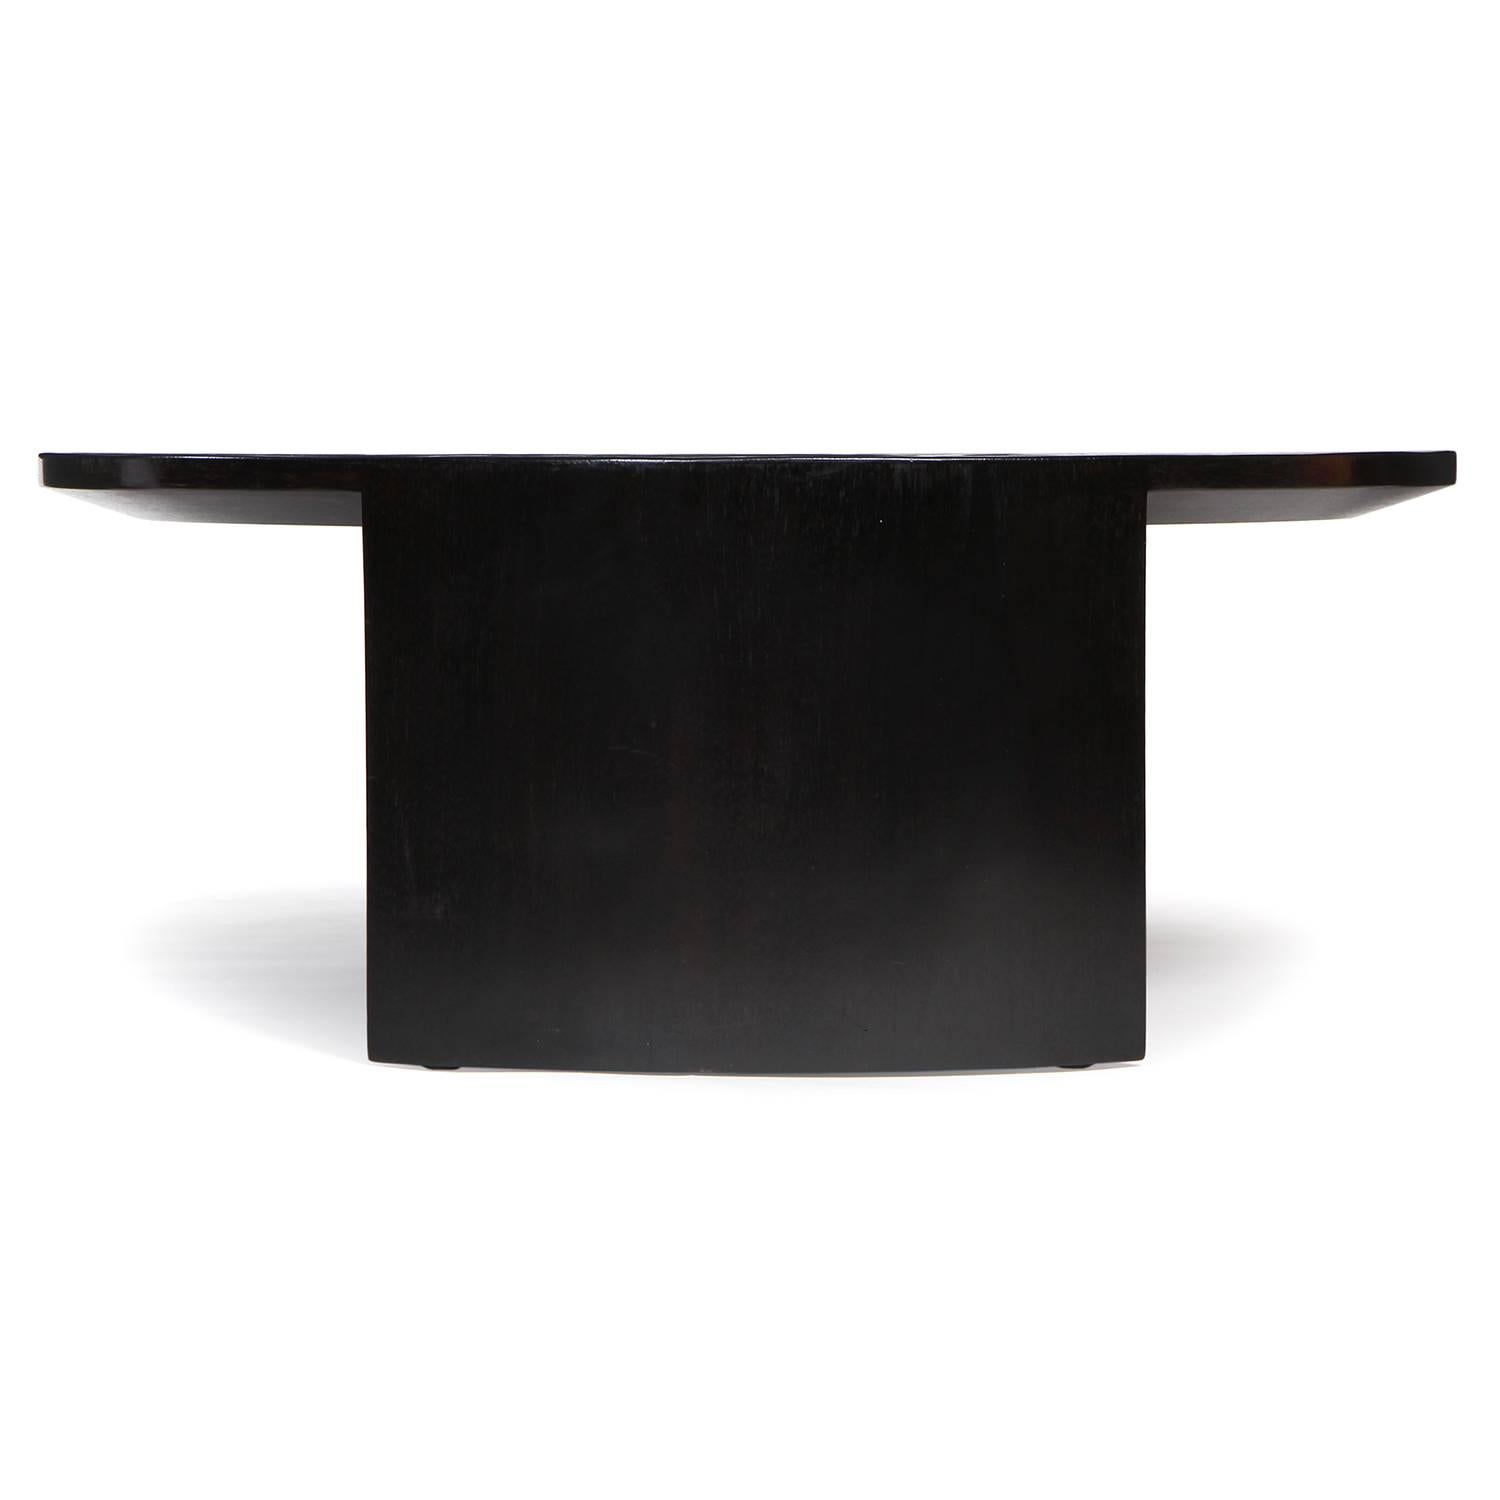 An impeccably rendered and beautifully proportioned custom split ebonized bamboo low table having a round top floating on a pair of curved and tapered slab legs.